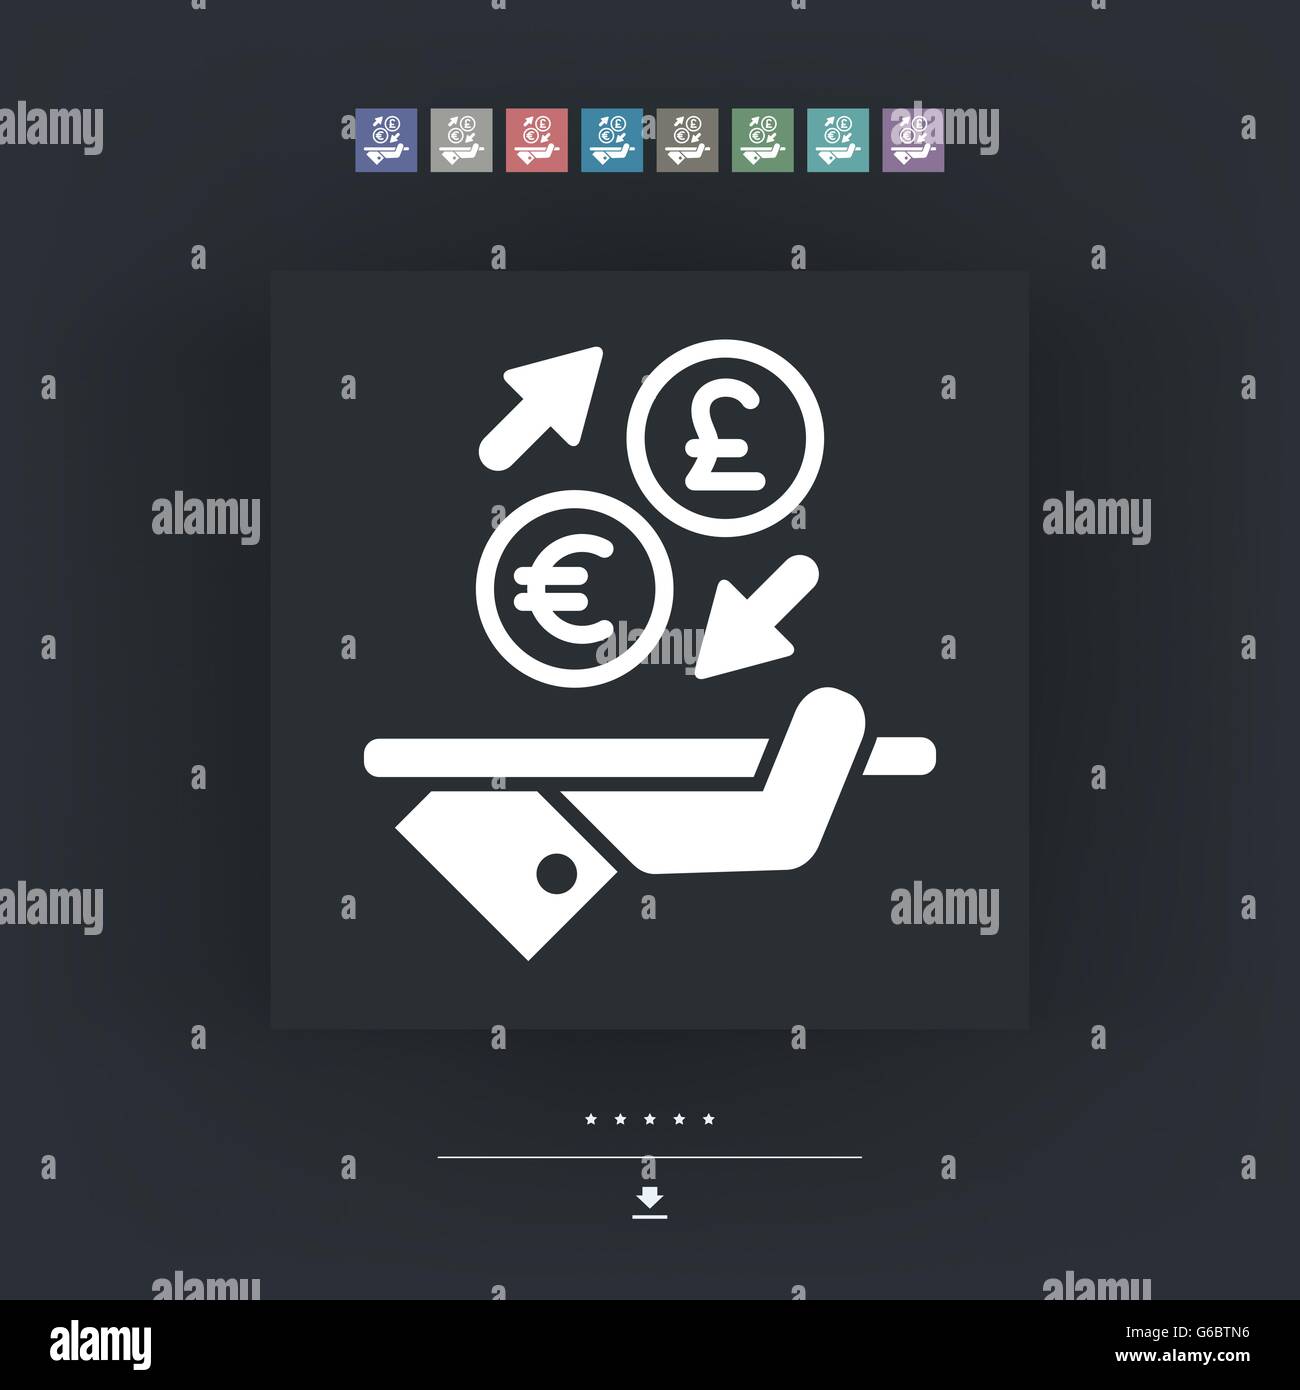 Euro/Sterling - Foreign currency exchange icon Stock Vector